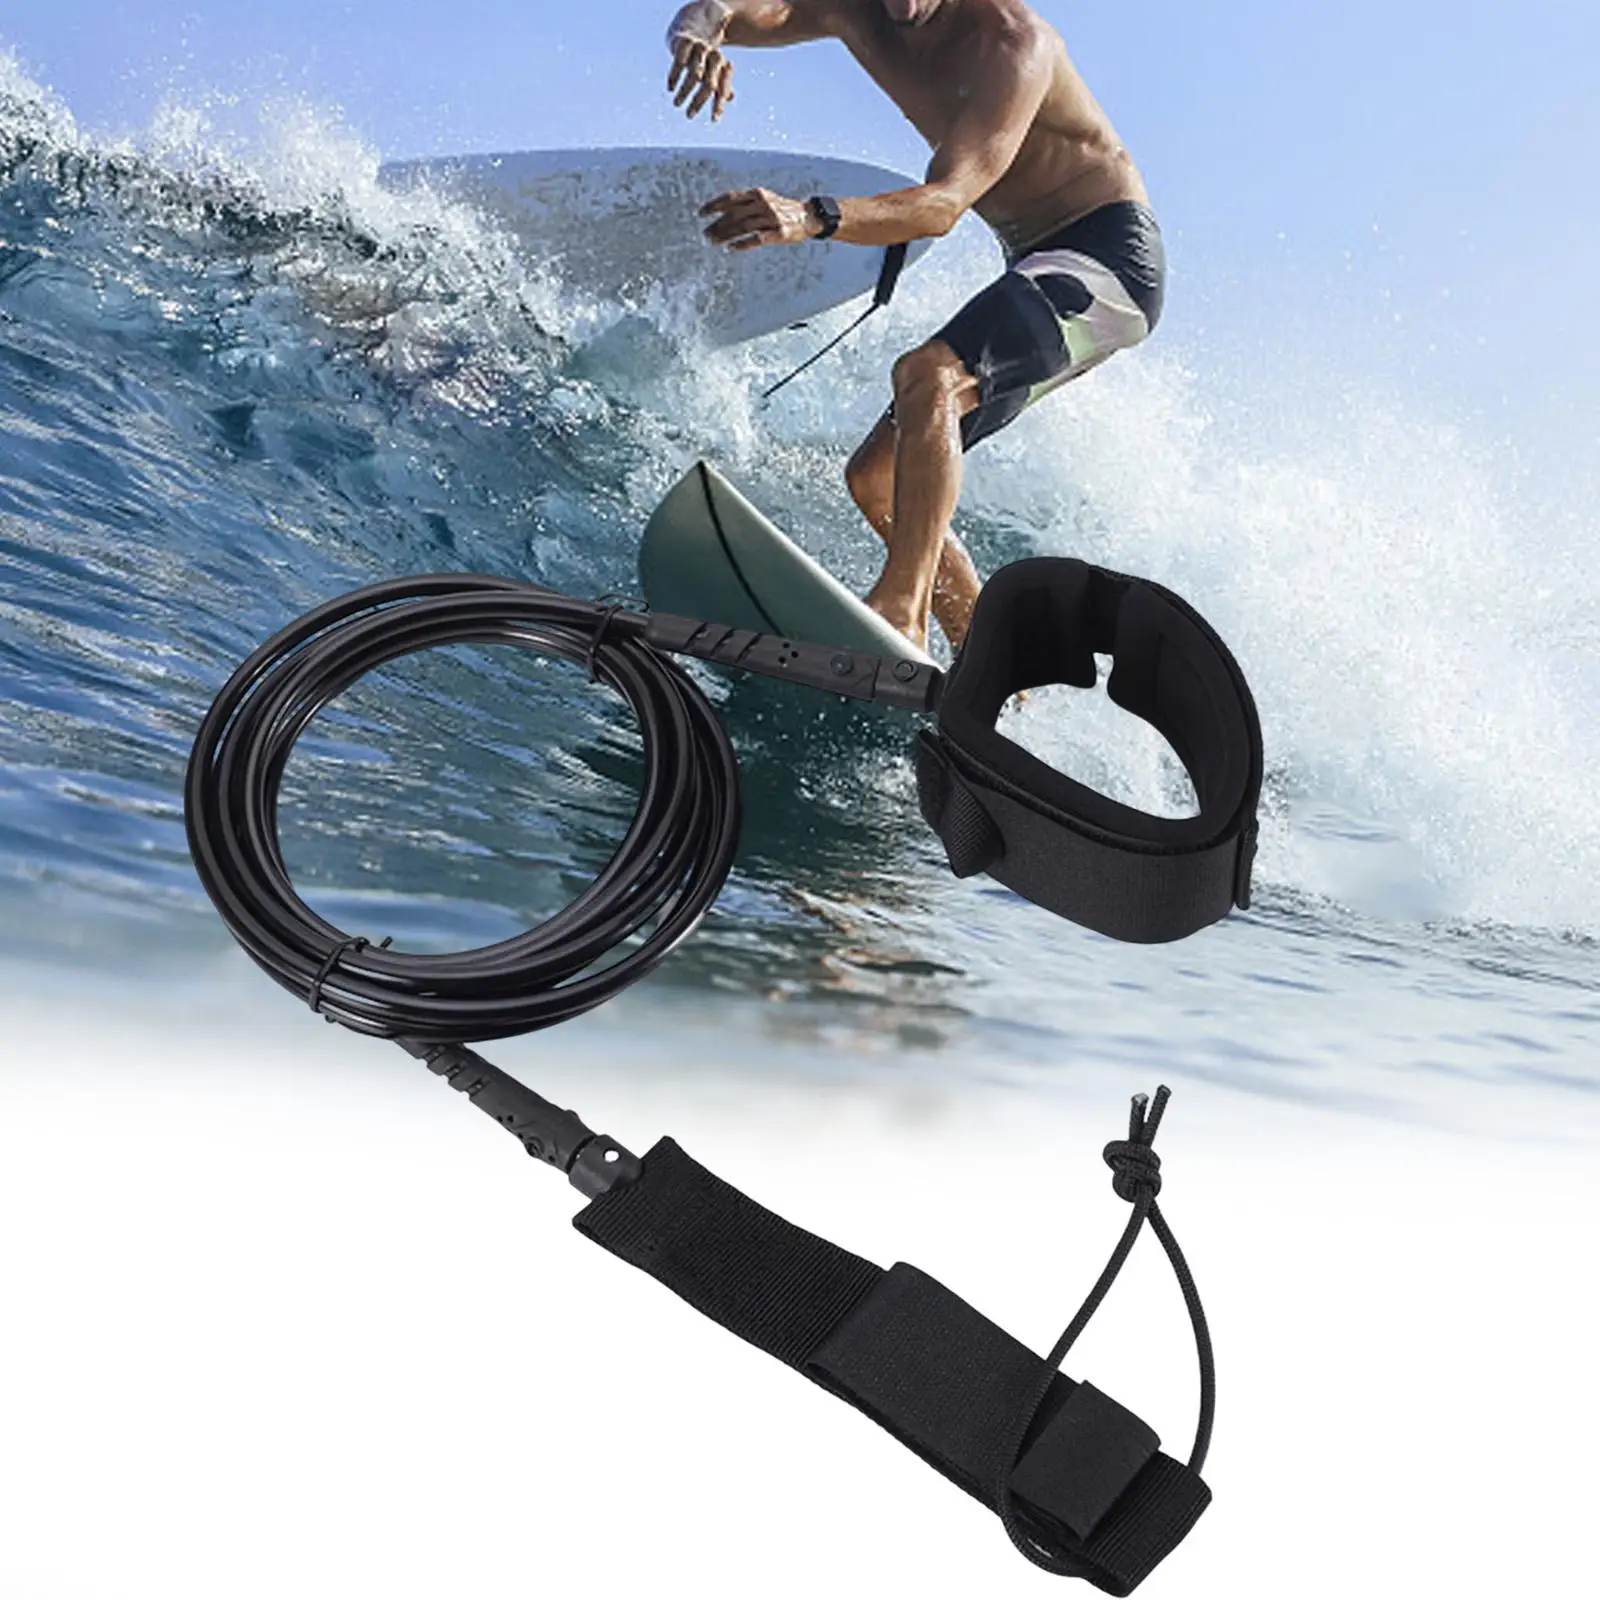 Surfboard Leash Straight Stand up Paddle Board Leash Surf Board Leg Rope for Short Boards Long Boards Fishing Boat Water Sports